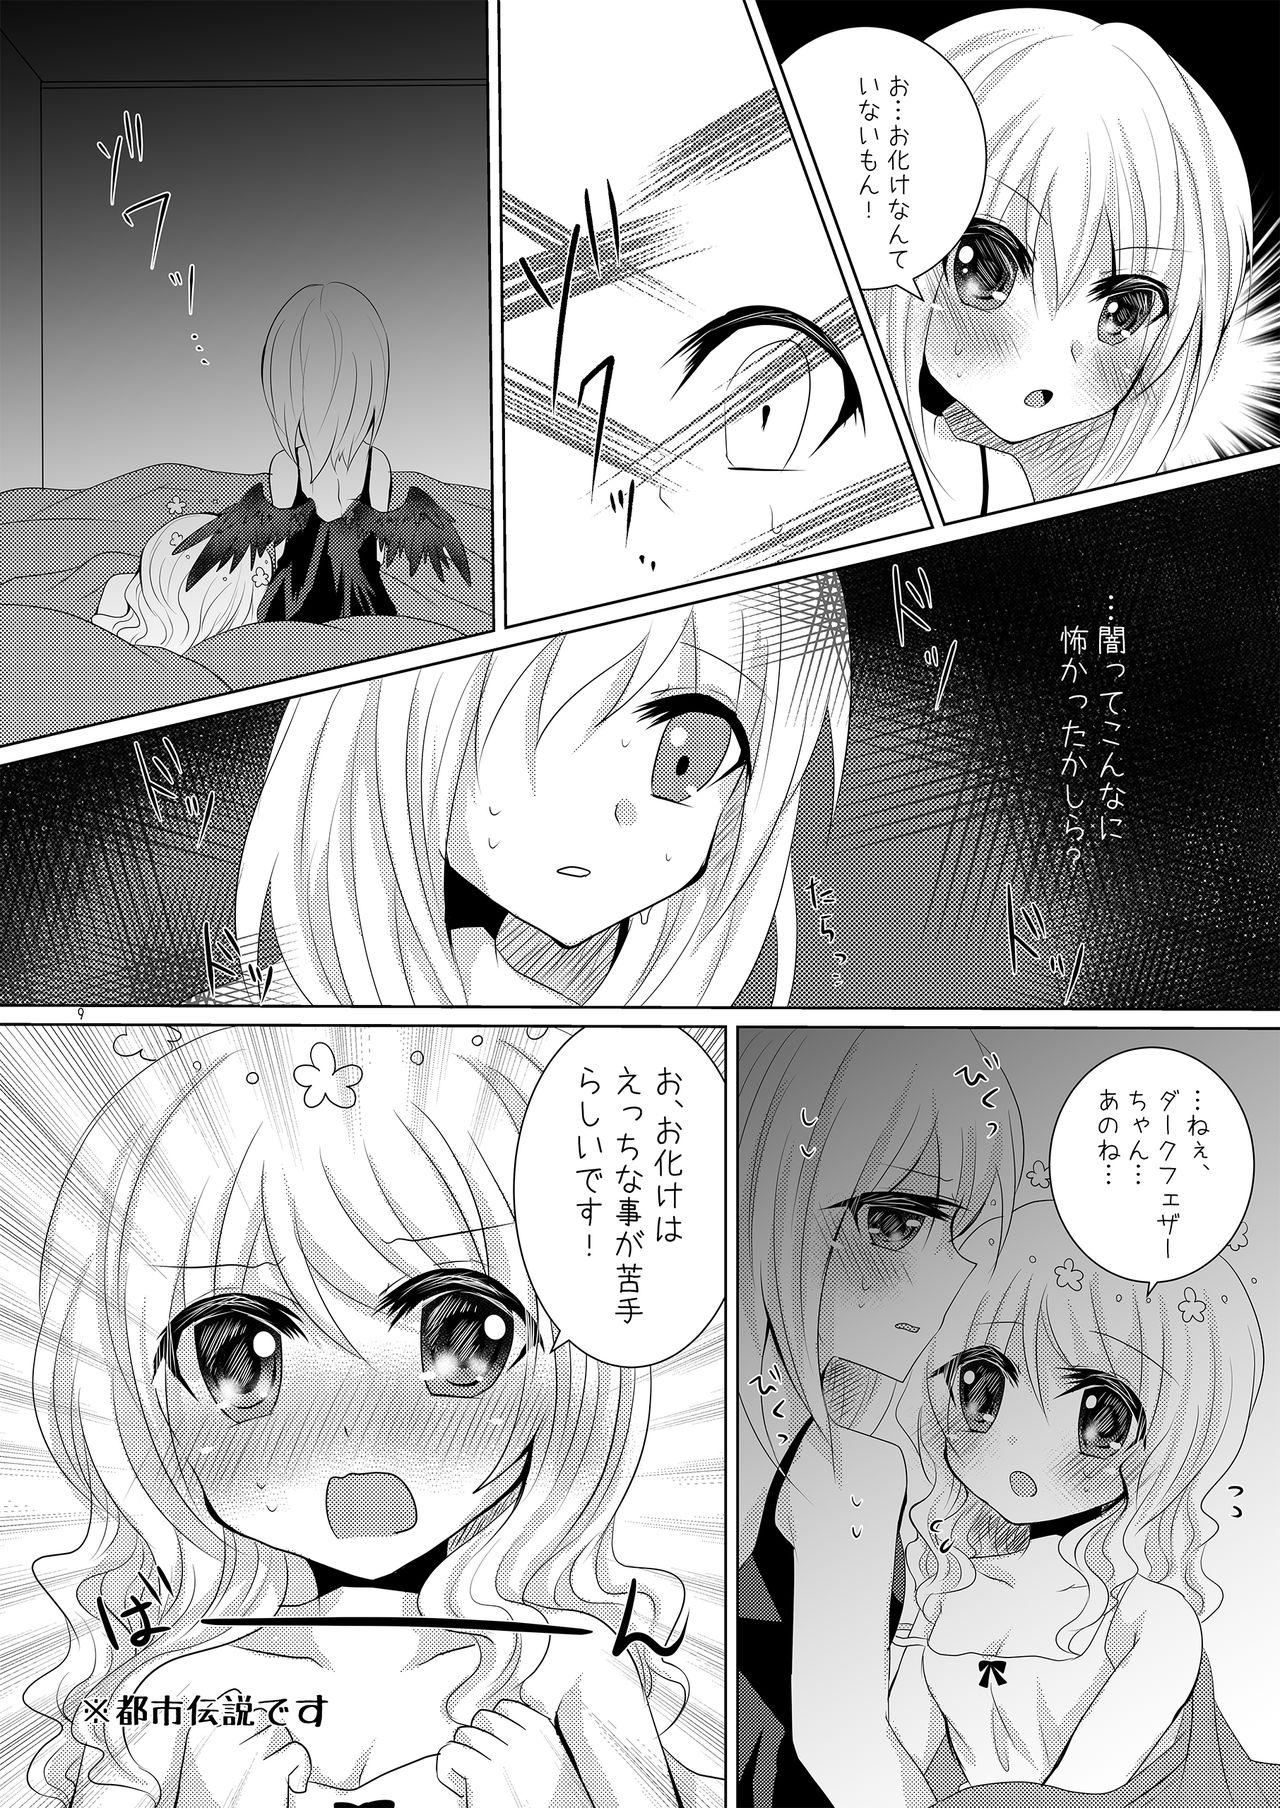 Moan Tenshi no Tawamure - Emil chronicle online Old Young - Page 8